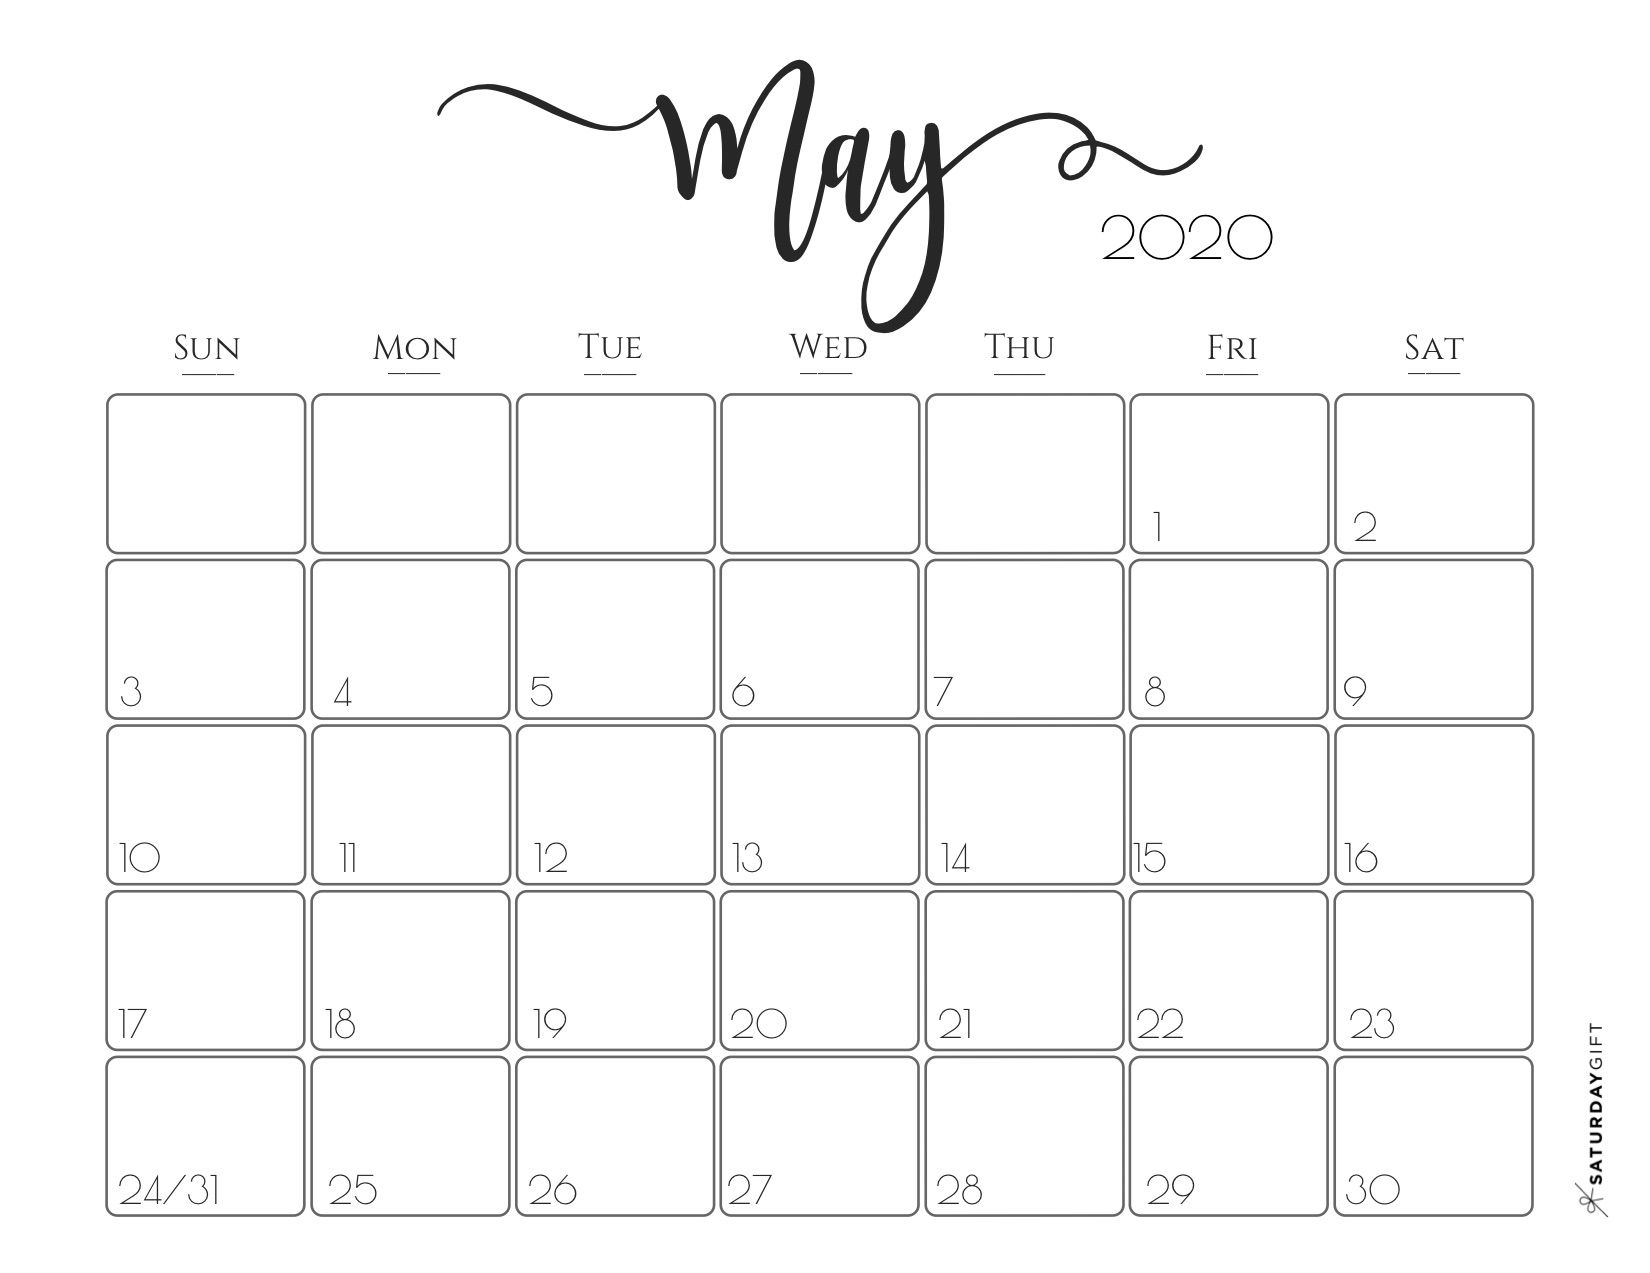 33 Printable Free May 2020 Calendars With Holidays - Onedesblog